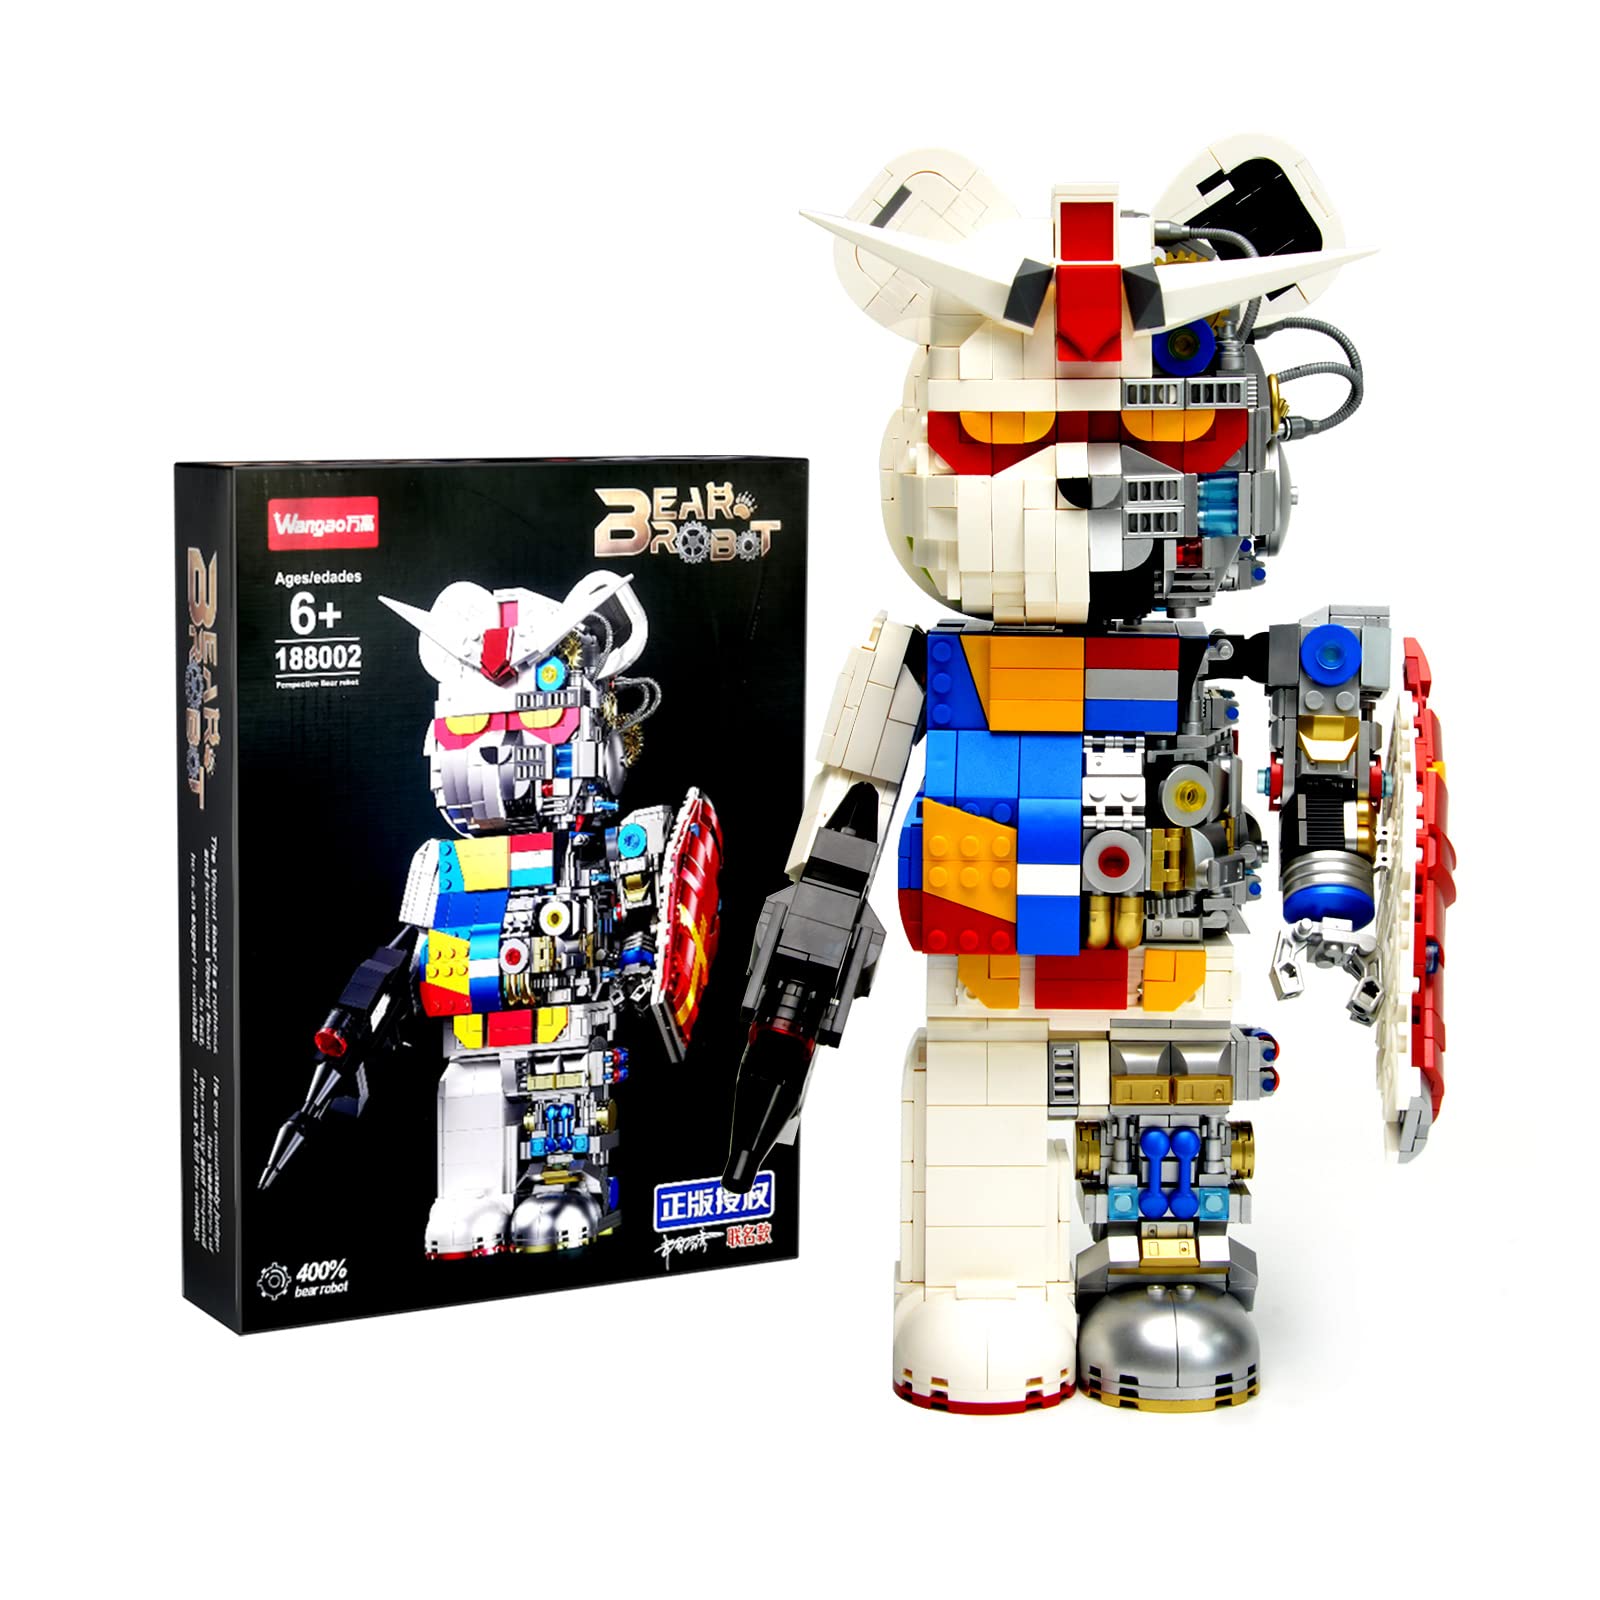 Mrkuriosity Mecha-Bear Building Sets, Half-Mecha Violent Bear Collectible Building Blocks Kit Display Model, Gift for Teens & Adults,Compatible with Lego(1681 Pieces)